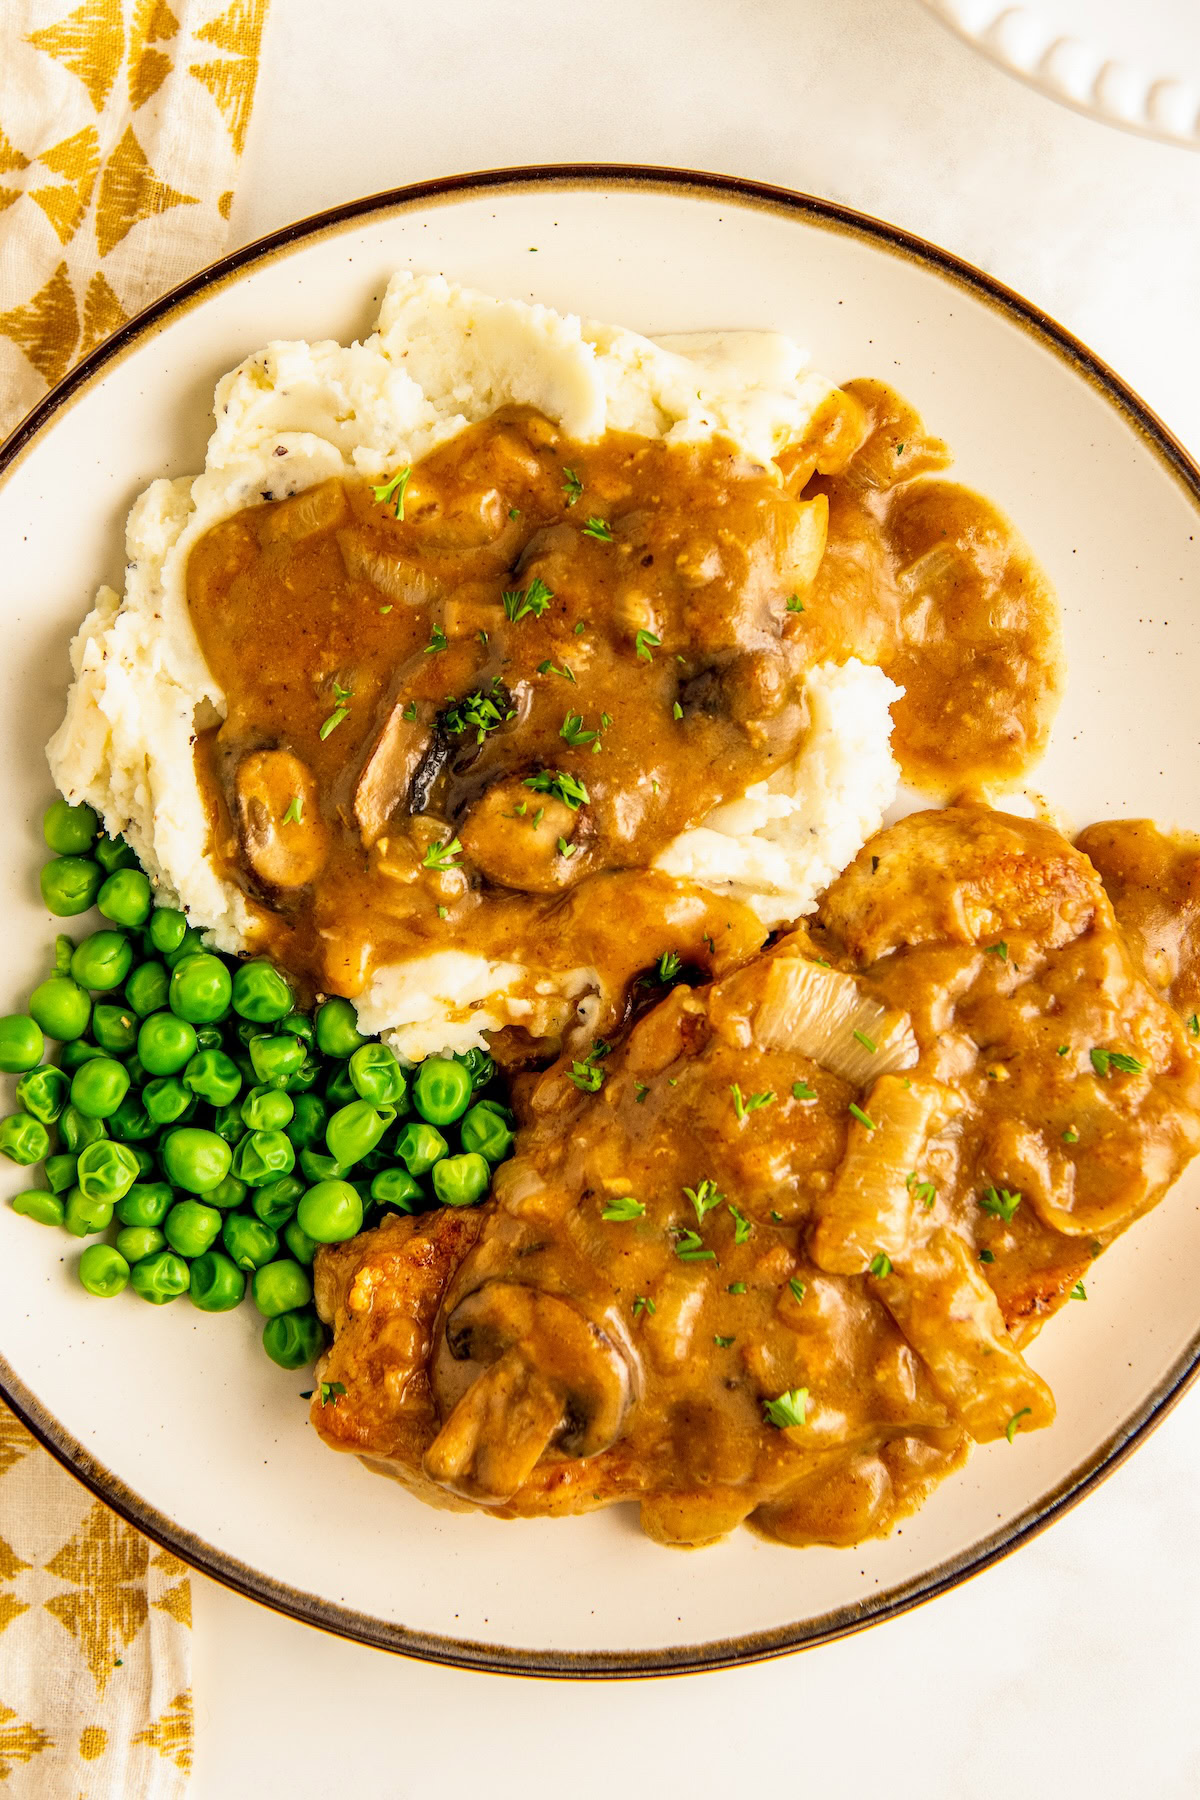 Smothered pork chops and gravy served on a plate with a side of mashed potatoes and peas.